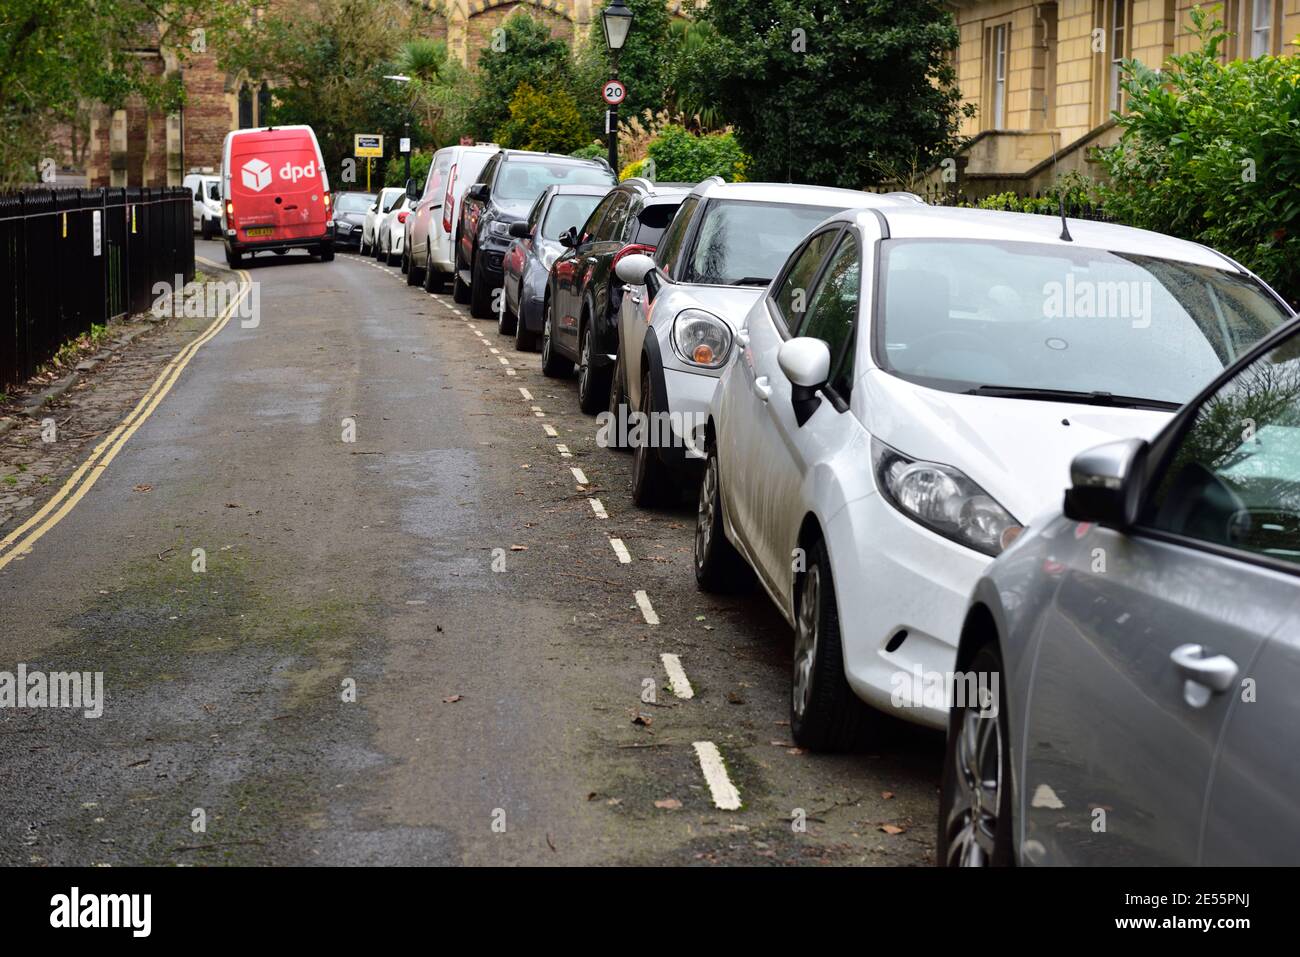 City residential street with cars parked, UK Stock Photo